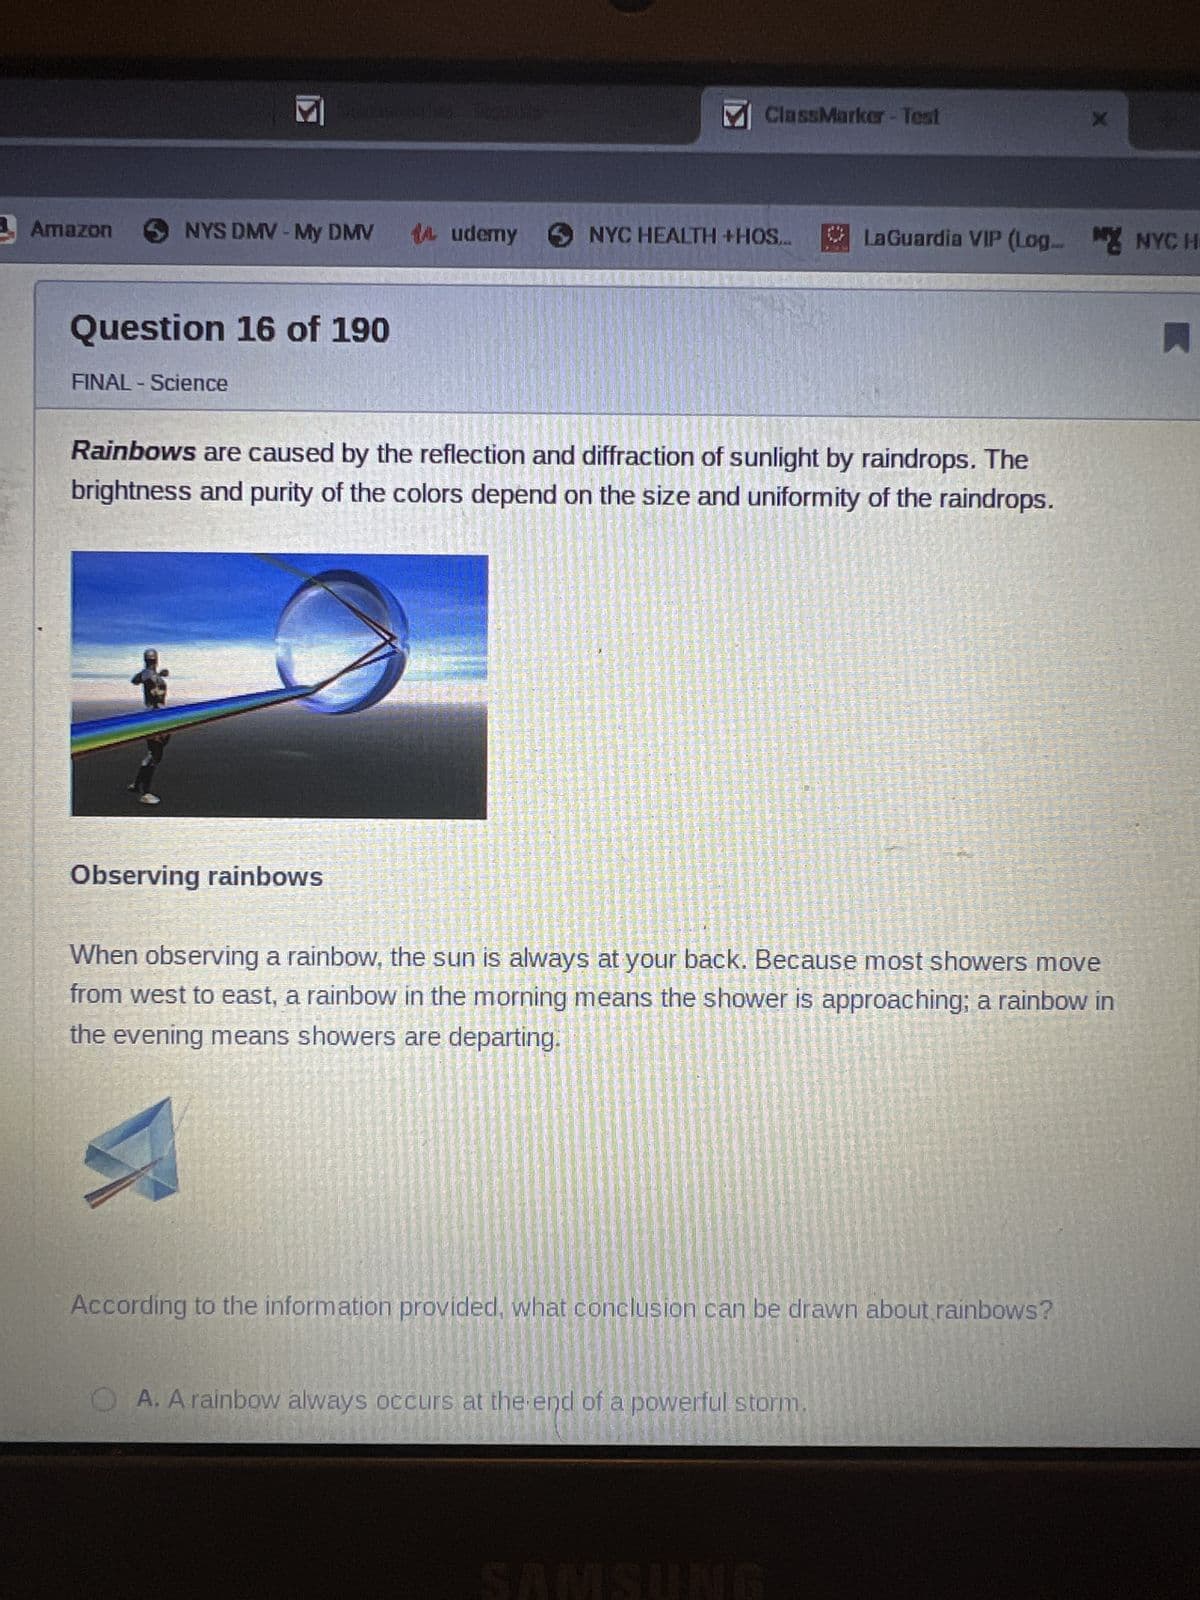 Amazon
M
NYS DMV - My DMV 14 udemy
Question 16 of 190
FINAL - Science
M ClassMarker - Test
Observing rainbows
Rainbows are caused by the reflection and diffraction of sunlight by raindrops. The
brightness and purity of the colors depend on the size and uniformity of the raindrops.
NYC HEALTH +HOS... LaGuardia VIP (Log MYNYCH
X
When observing a rainbow, the sun is always at your back. Because most showers move
from west to east, a rainbow in the morning means the shower is approaching; a rainbow in
the evening means showers are departing.
According to the information provided, what conclusion can be drawn about rainbows?
OA. A rainbow always occurs at the end of a powerful storm.